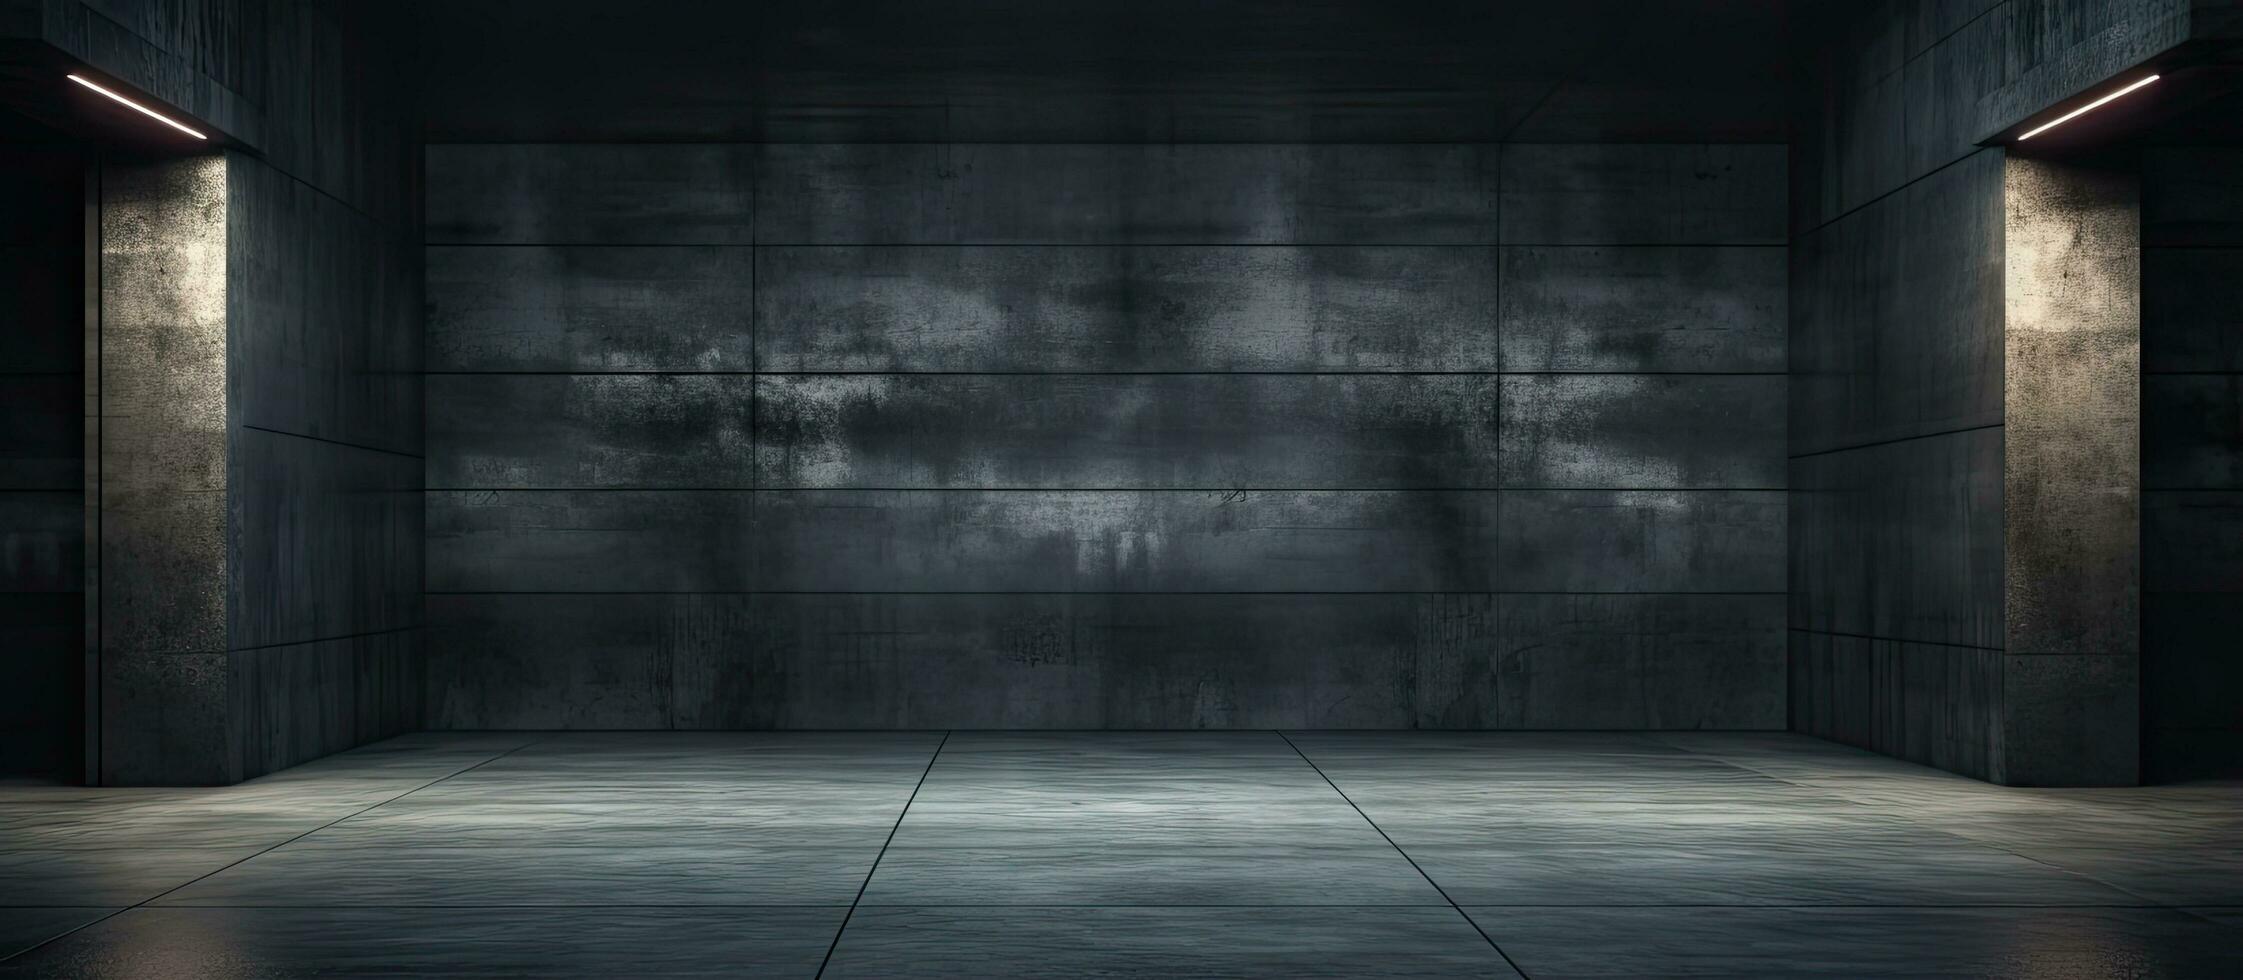 Rendered illustration of a dark abstract concrete room illuminated at night Architectural background photo